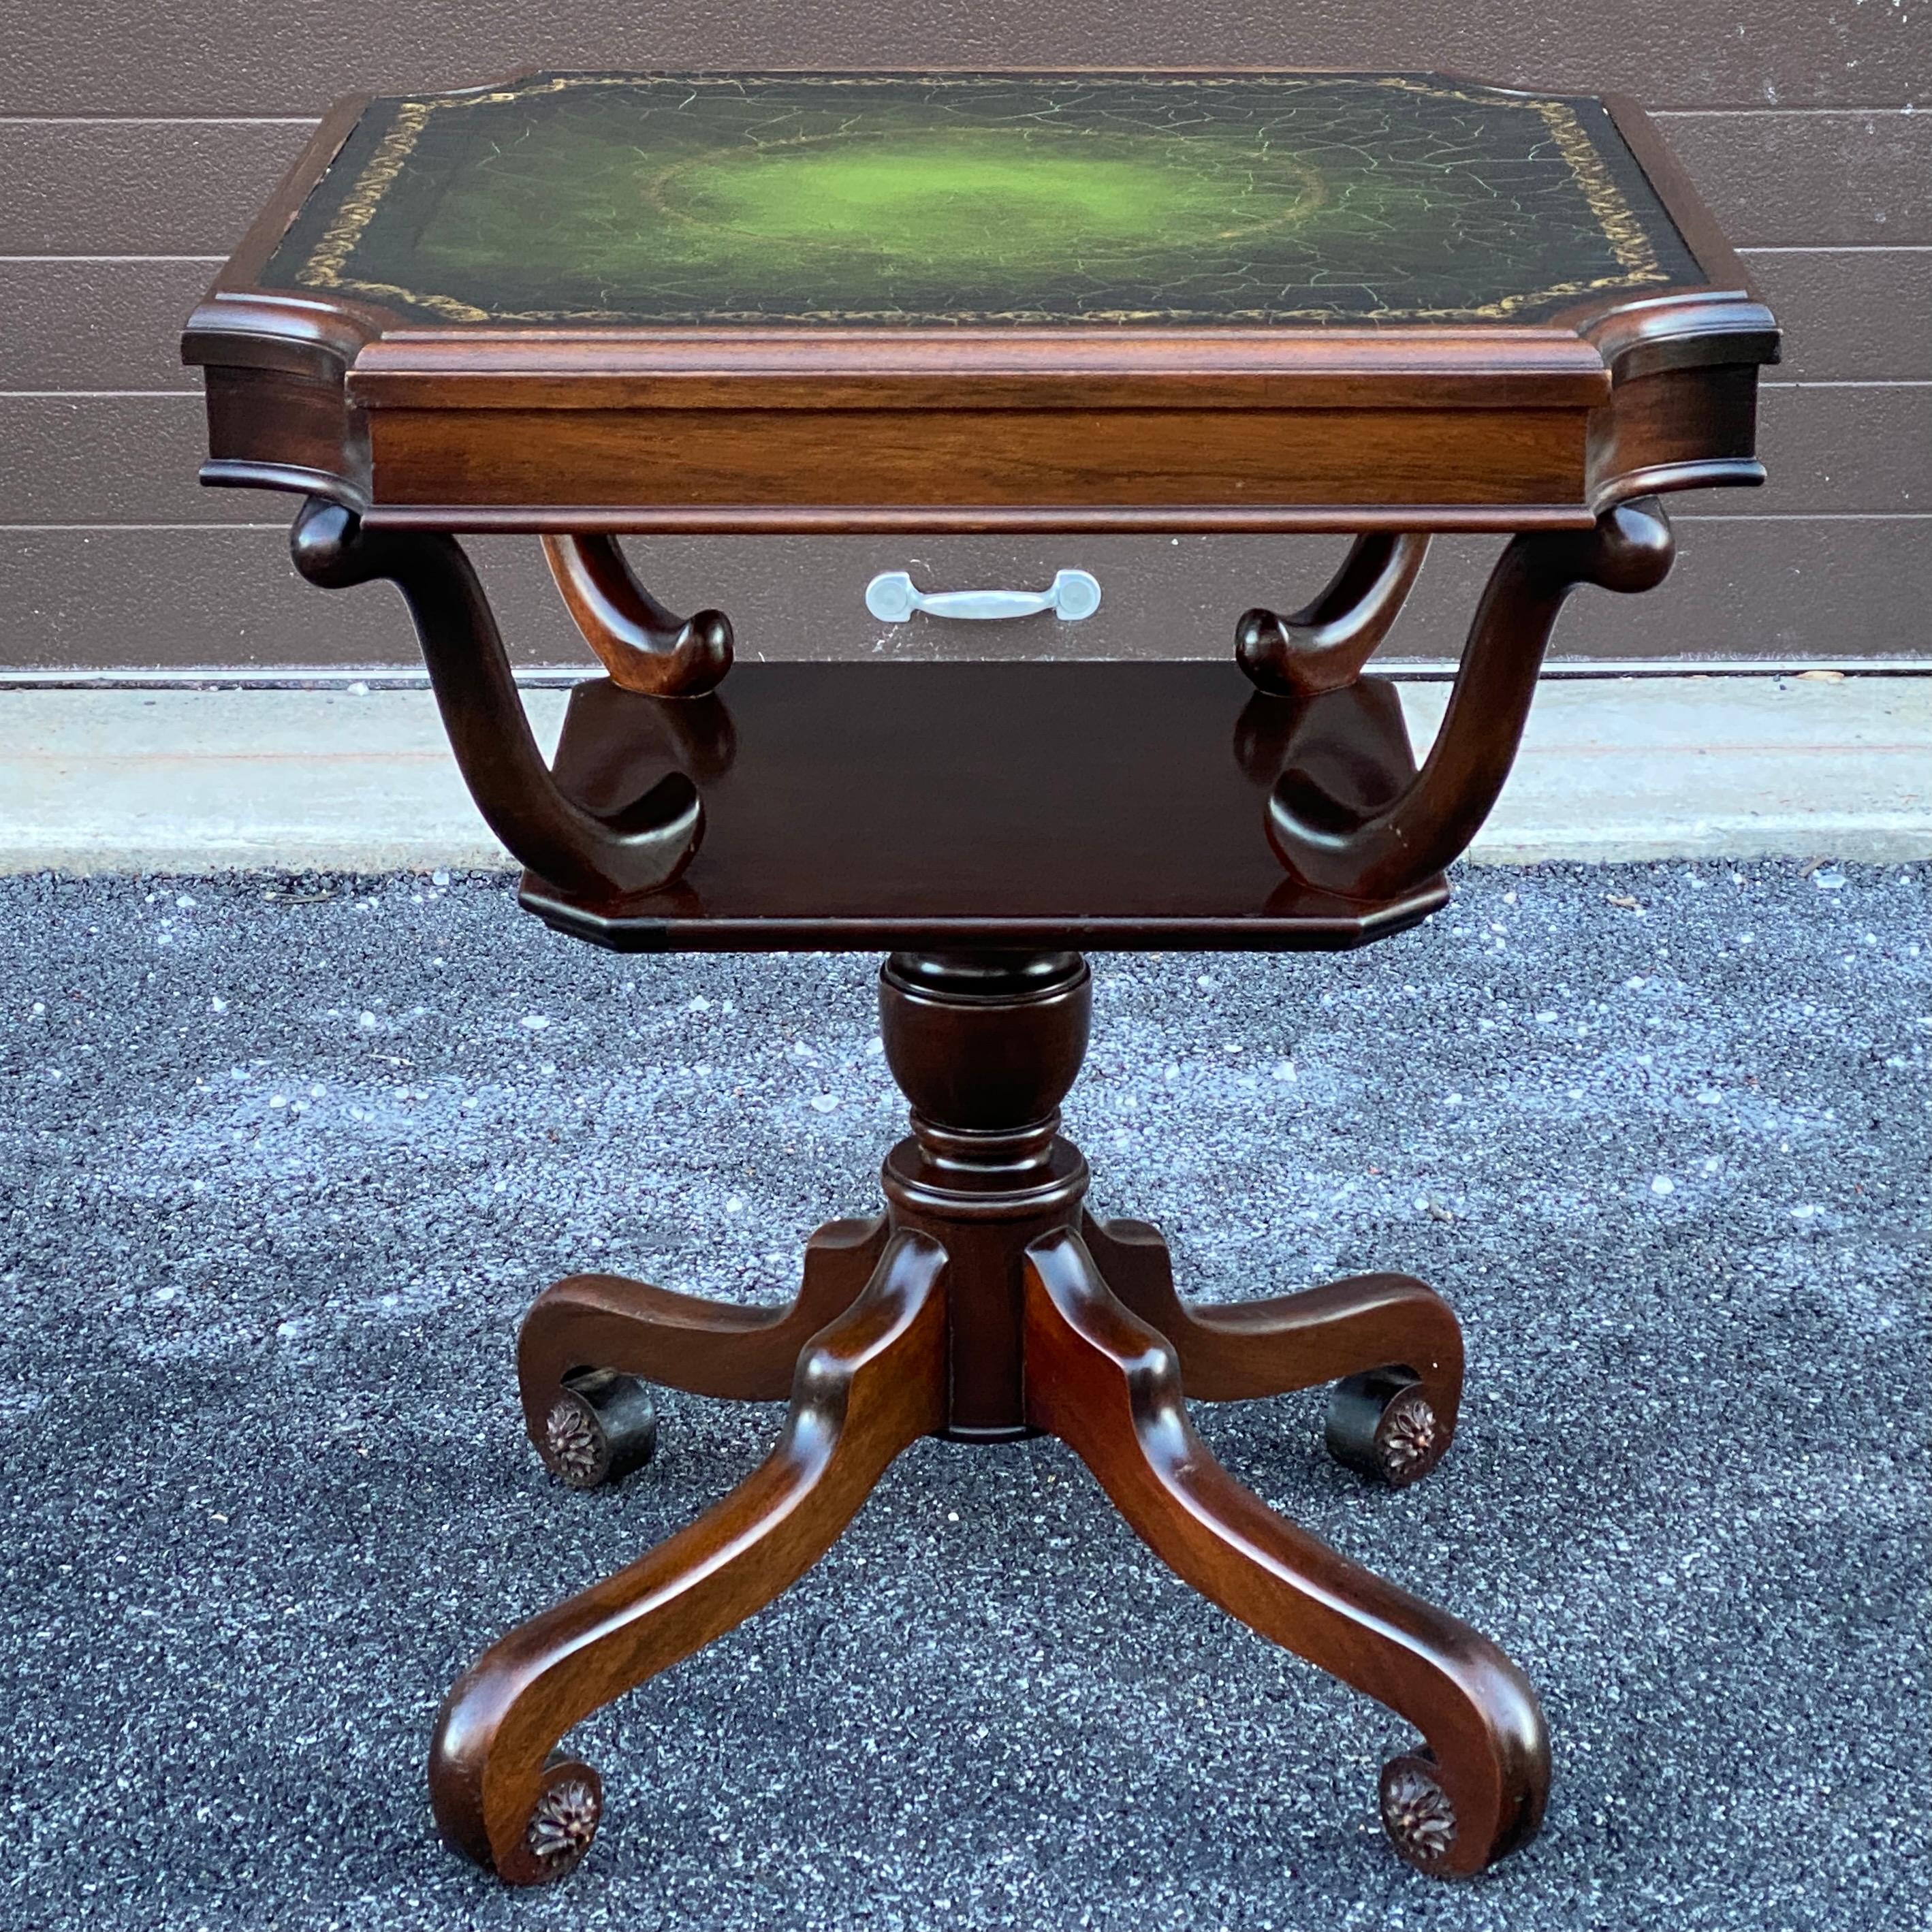 Green leather top mahogany center table with scroll feet circa early 20th century unmarked. 
8” shelf clearance.